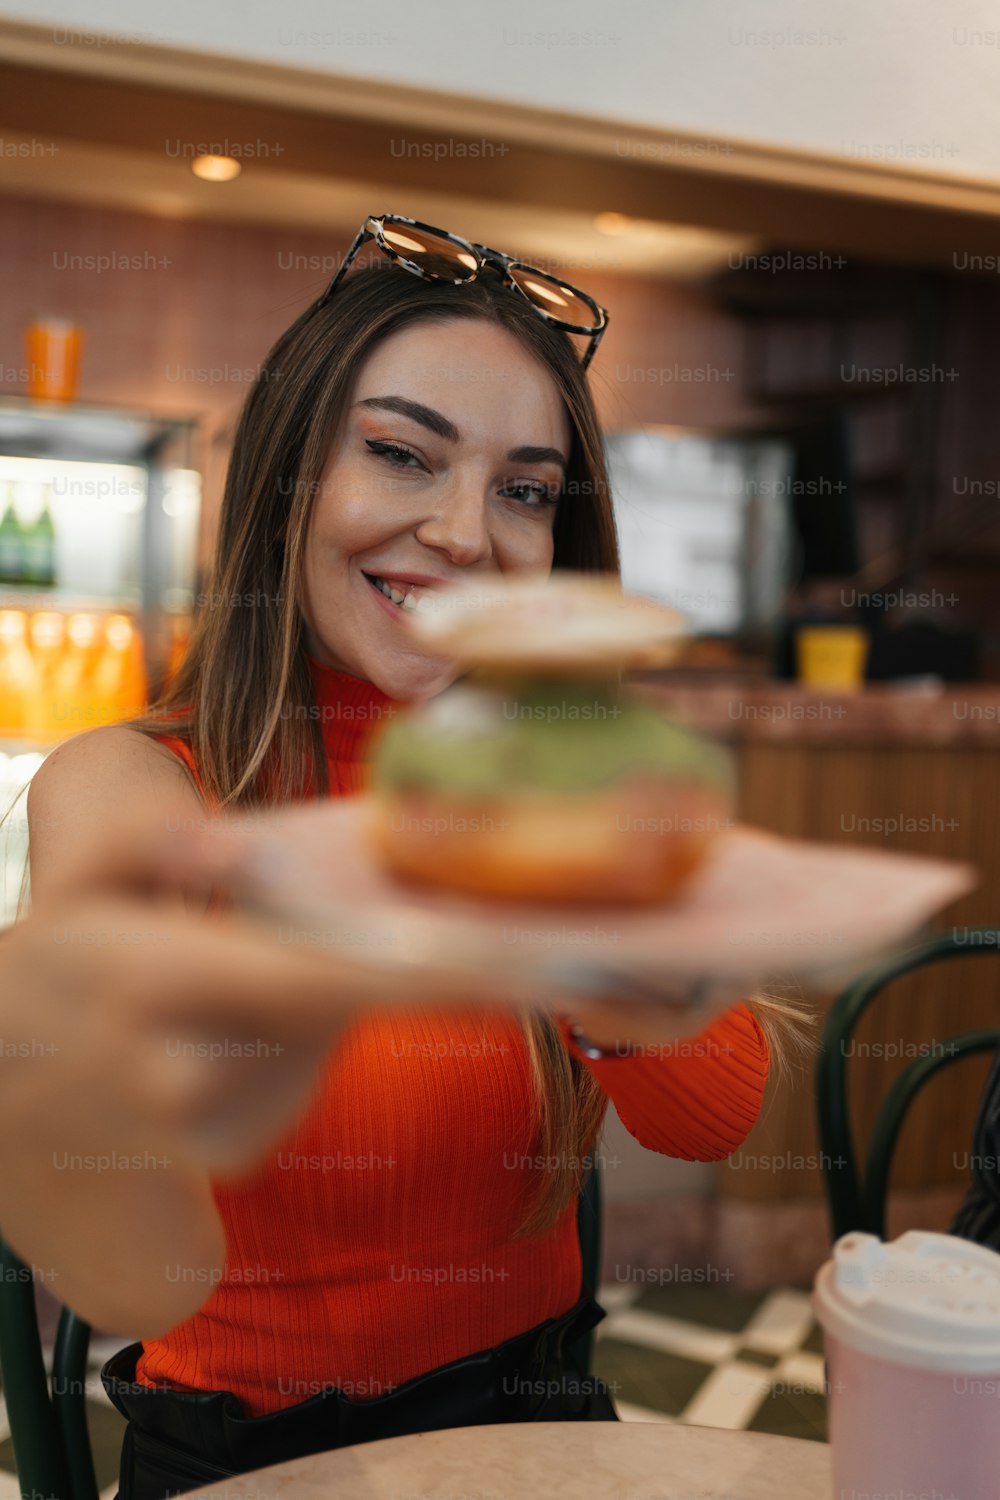 a woman holding a plate with a sandwich on it